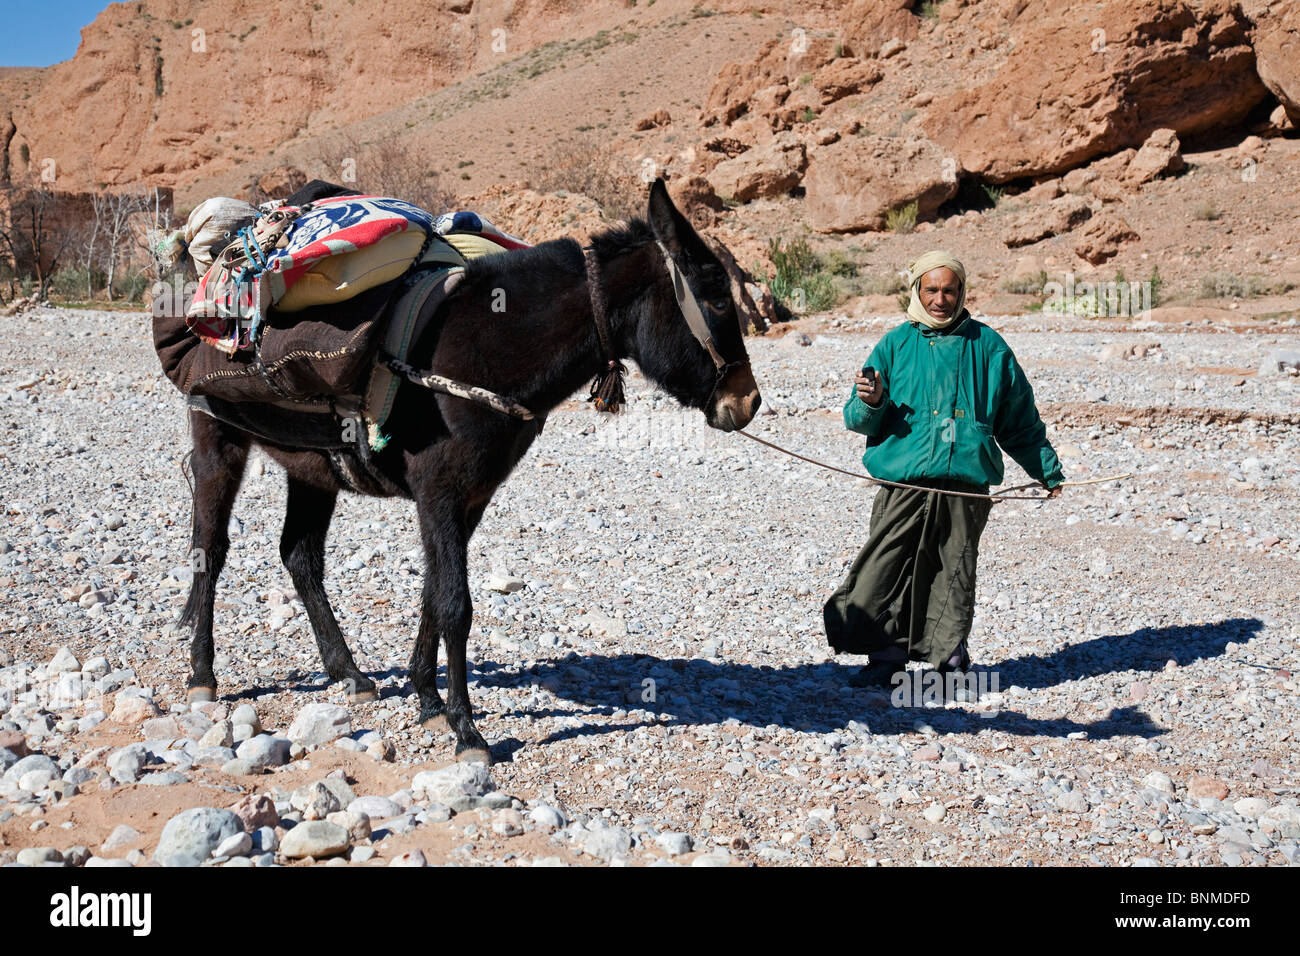 Dried river bed (oued) above the Dades Gorge with hill farmer and mule, Dades Valley, Central Morocco Stock Photo